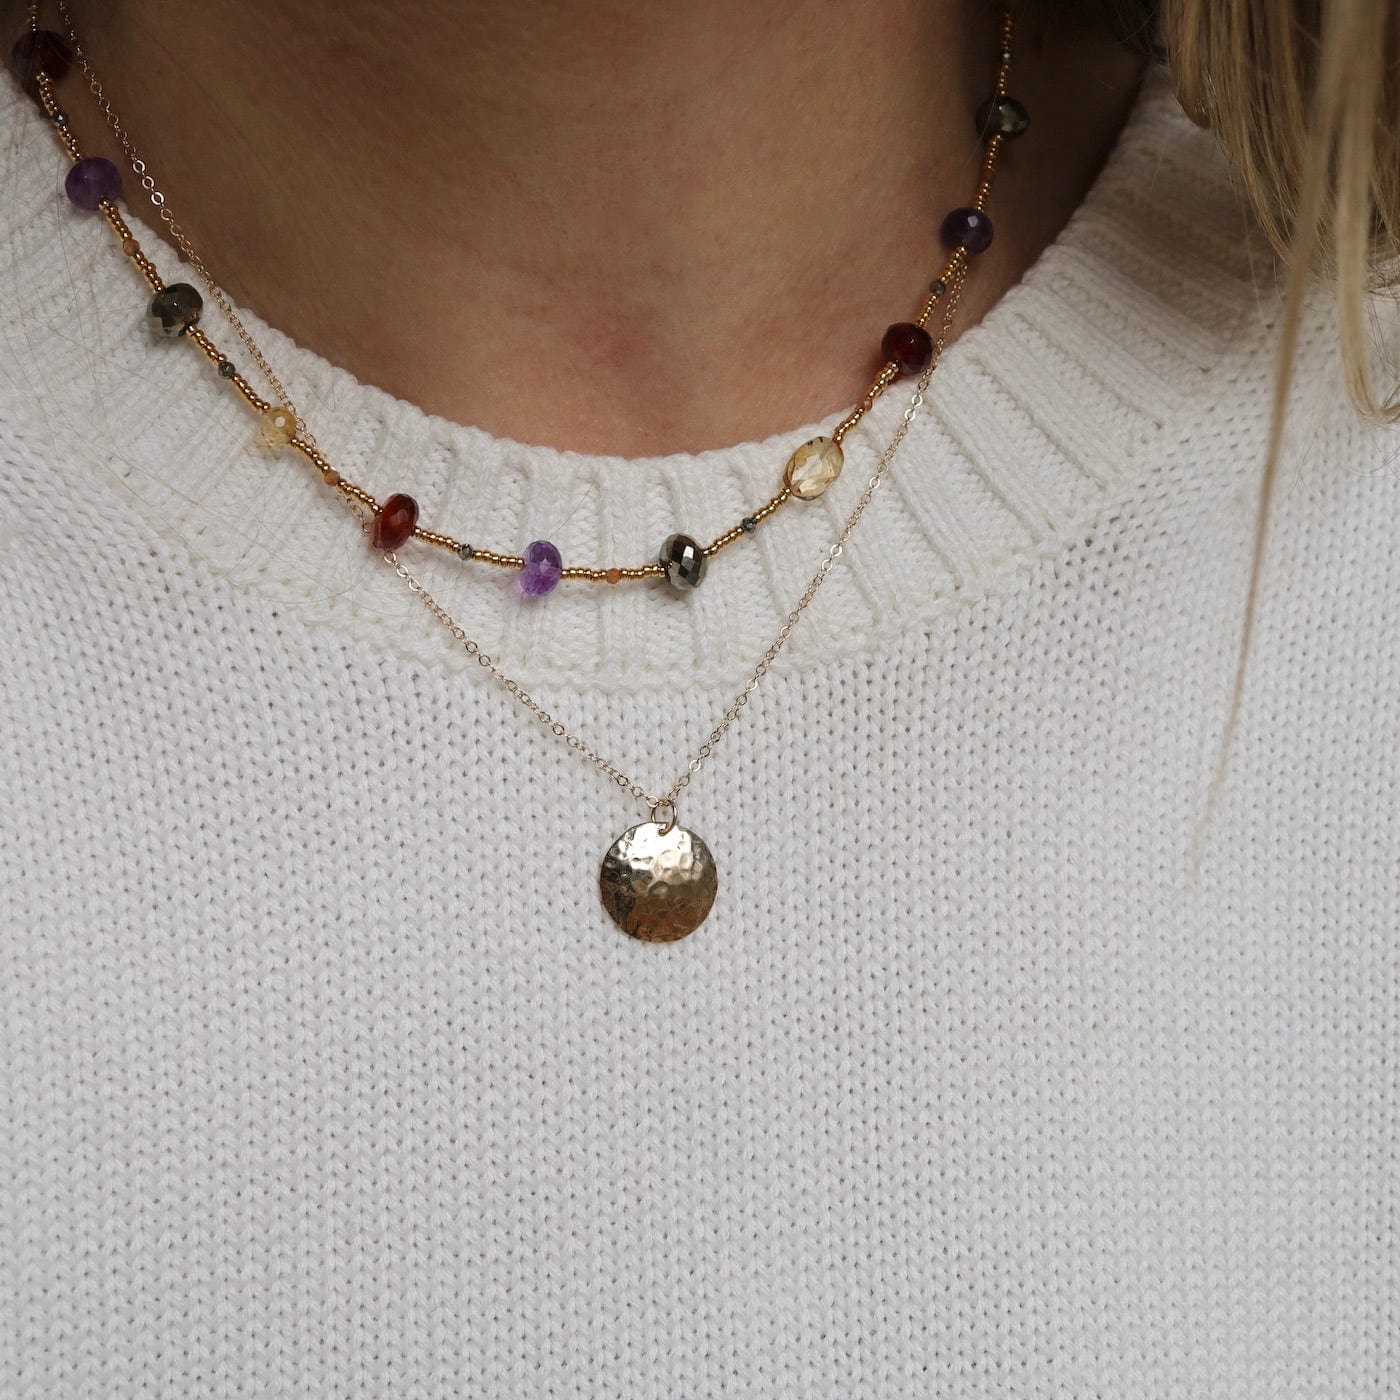 NKL-GF Warm Gold Mix Necklace